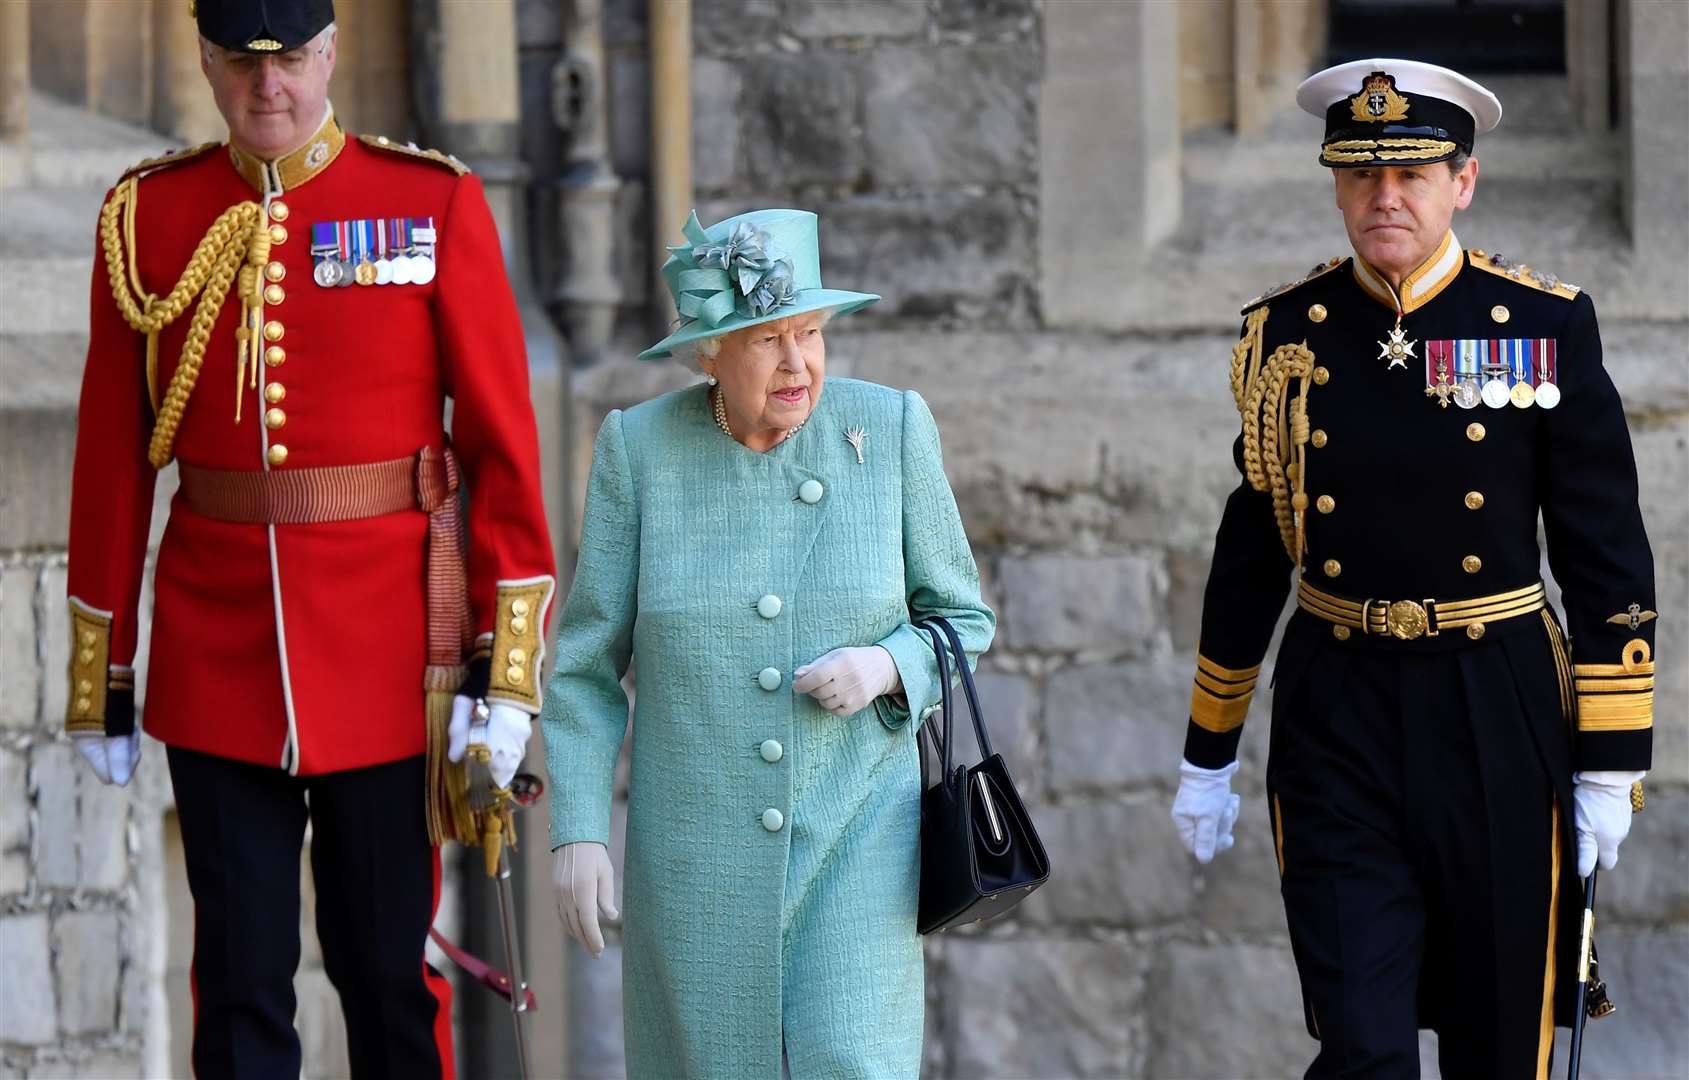 The Queen attended the ‘mini-Trooping’ ceremony flanked by Lieutenant Colonel Michael Vernon, left, and Vice Admiral Sir Tony Johnstone-Burt, right (Toby Melville/PA)